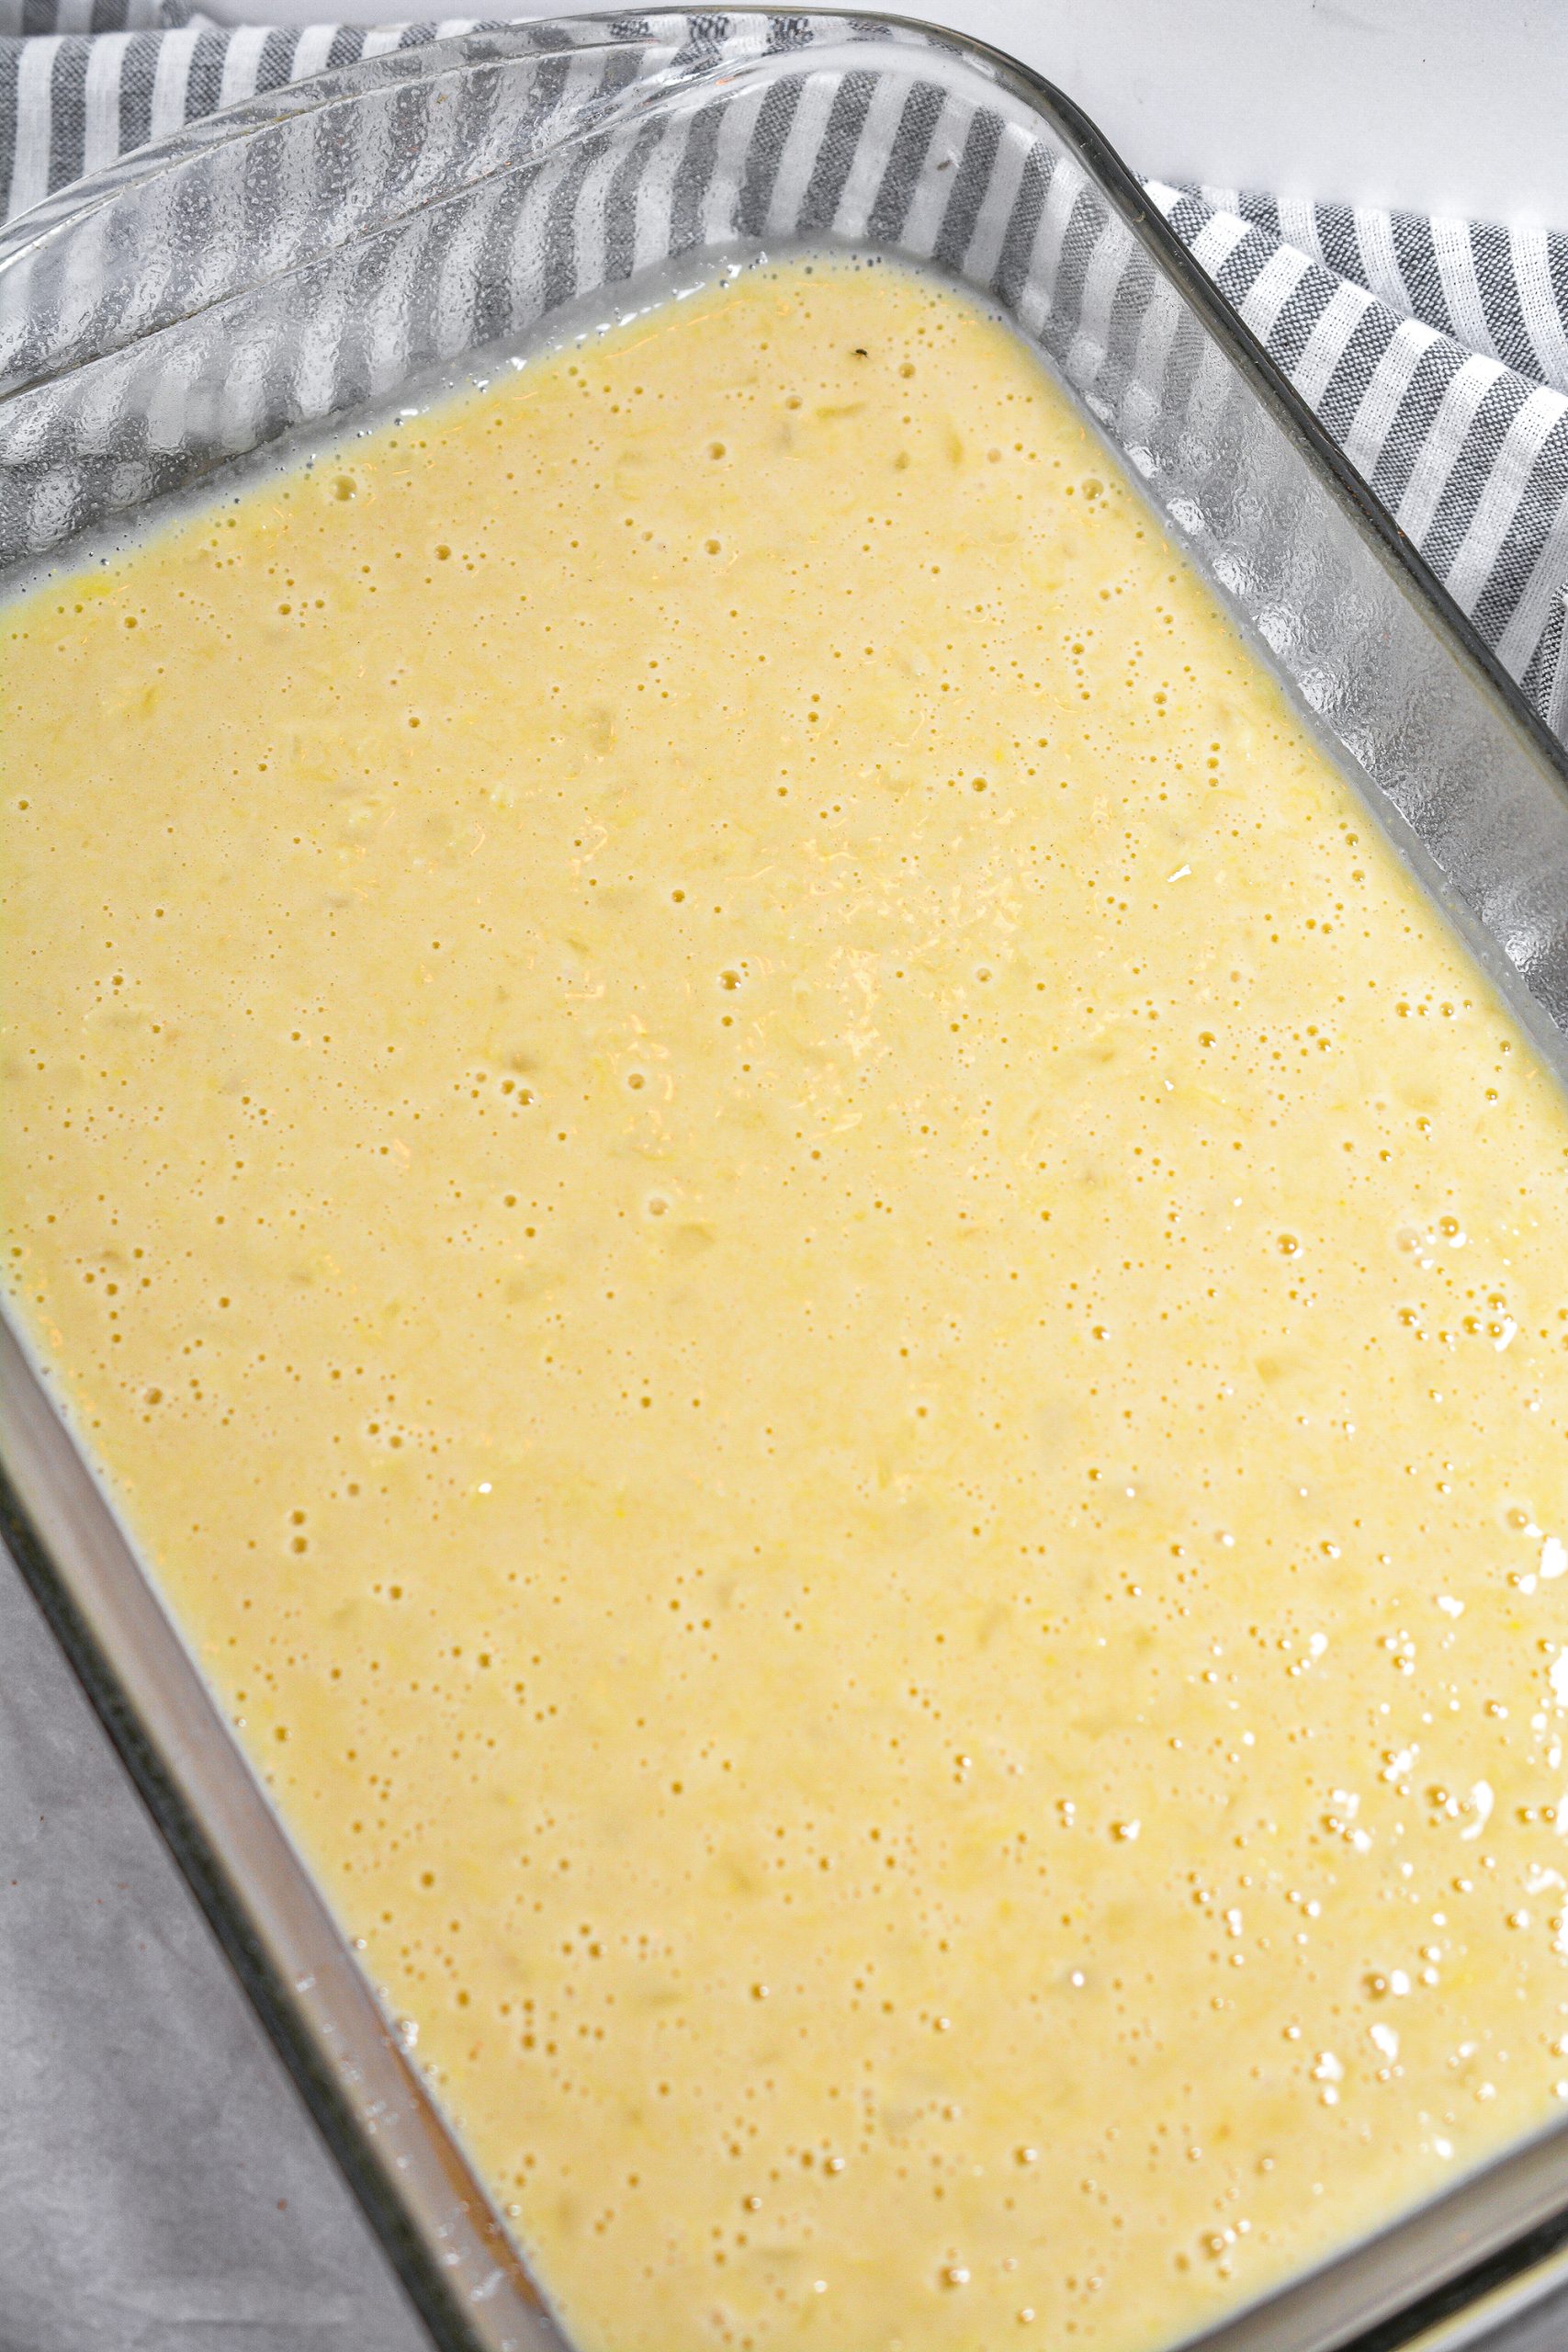 Pour the batter into a well-greased 9x13 baking dish.